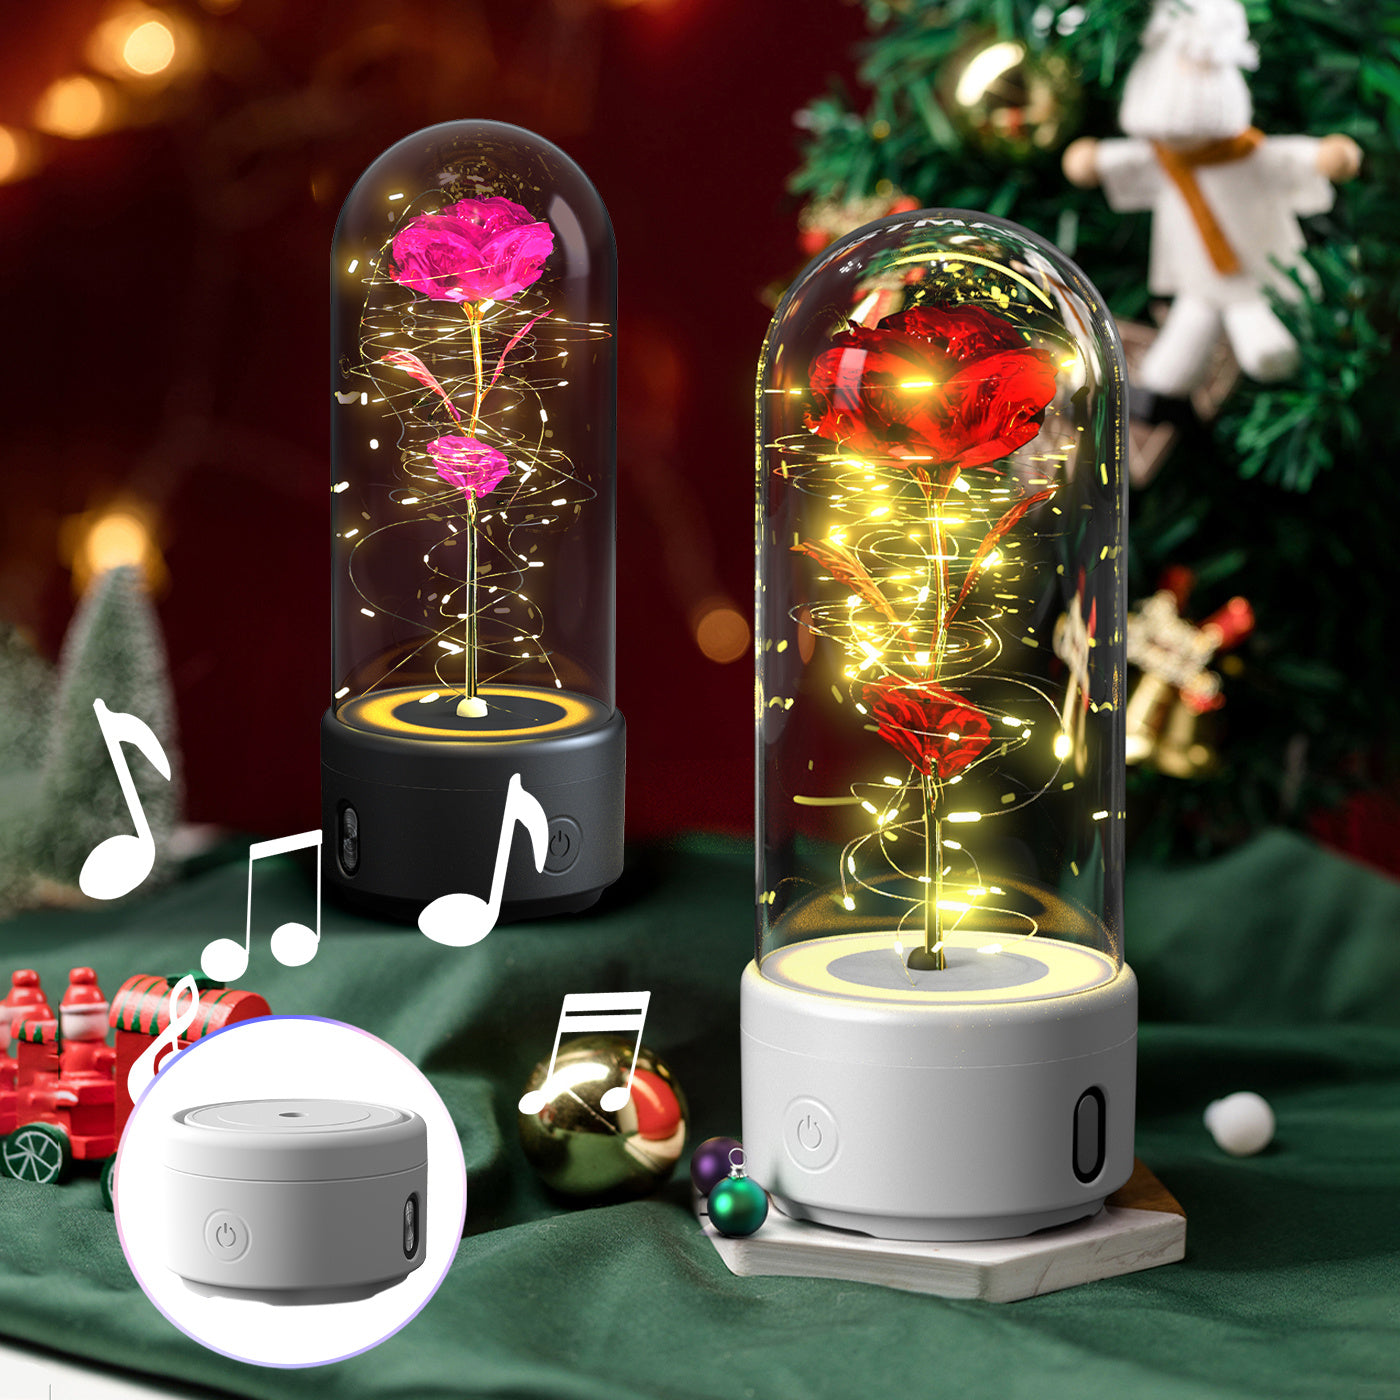 A unique gift that combines an LED light and a Bluetooth speaker with rose flowers. Glass-covered Rose Luminous Night Light Ornament